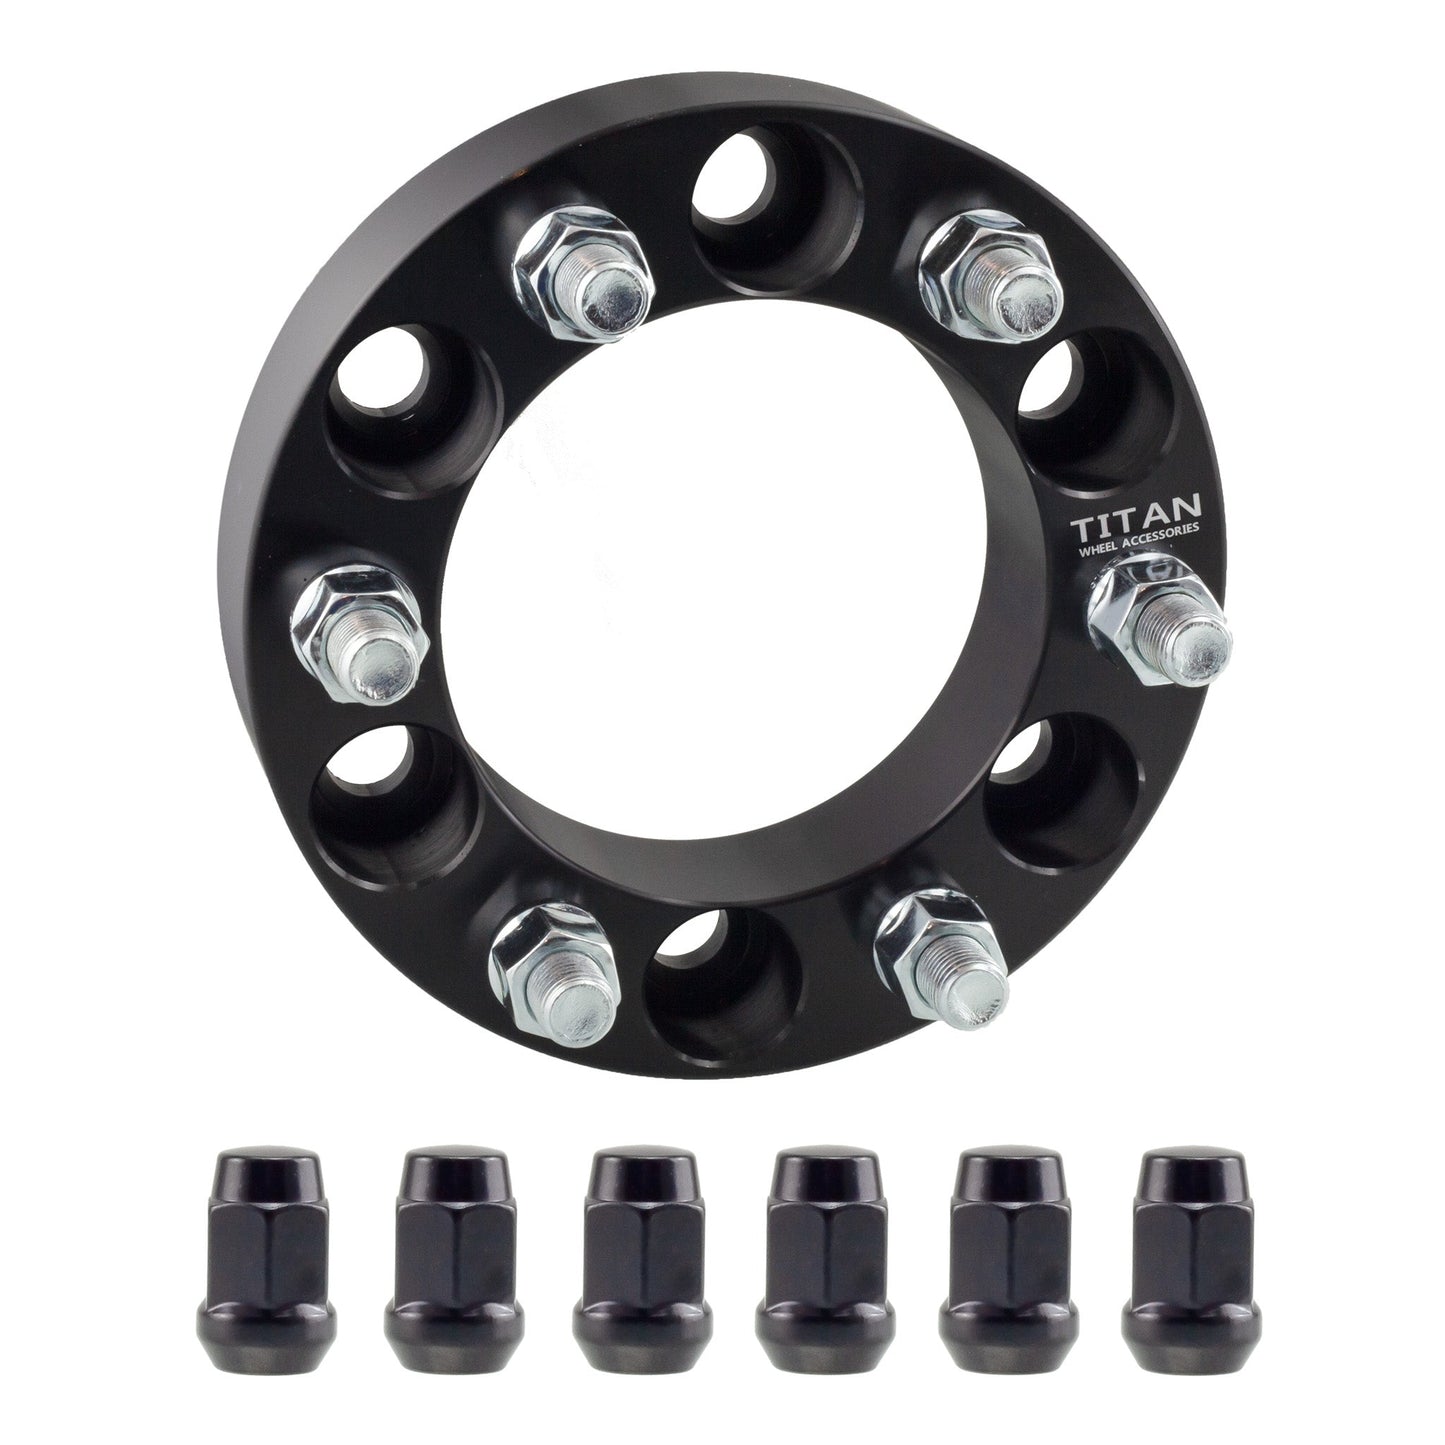 1.5" (38mm) Titan Wheel Spacers for Ford Bronco 2021-2022 Ranger 2019+| 6x5.5 (6x139.7) | 93.1 Hubcentric | 12x1.5 Studs | Titan Wheel Accessories